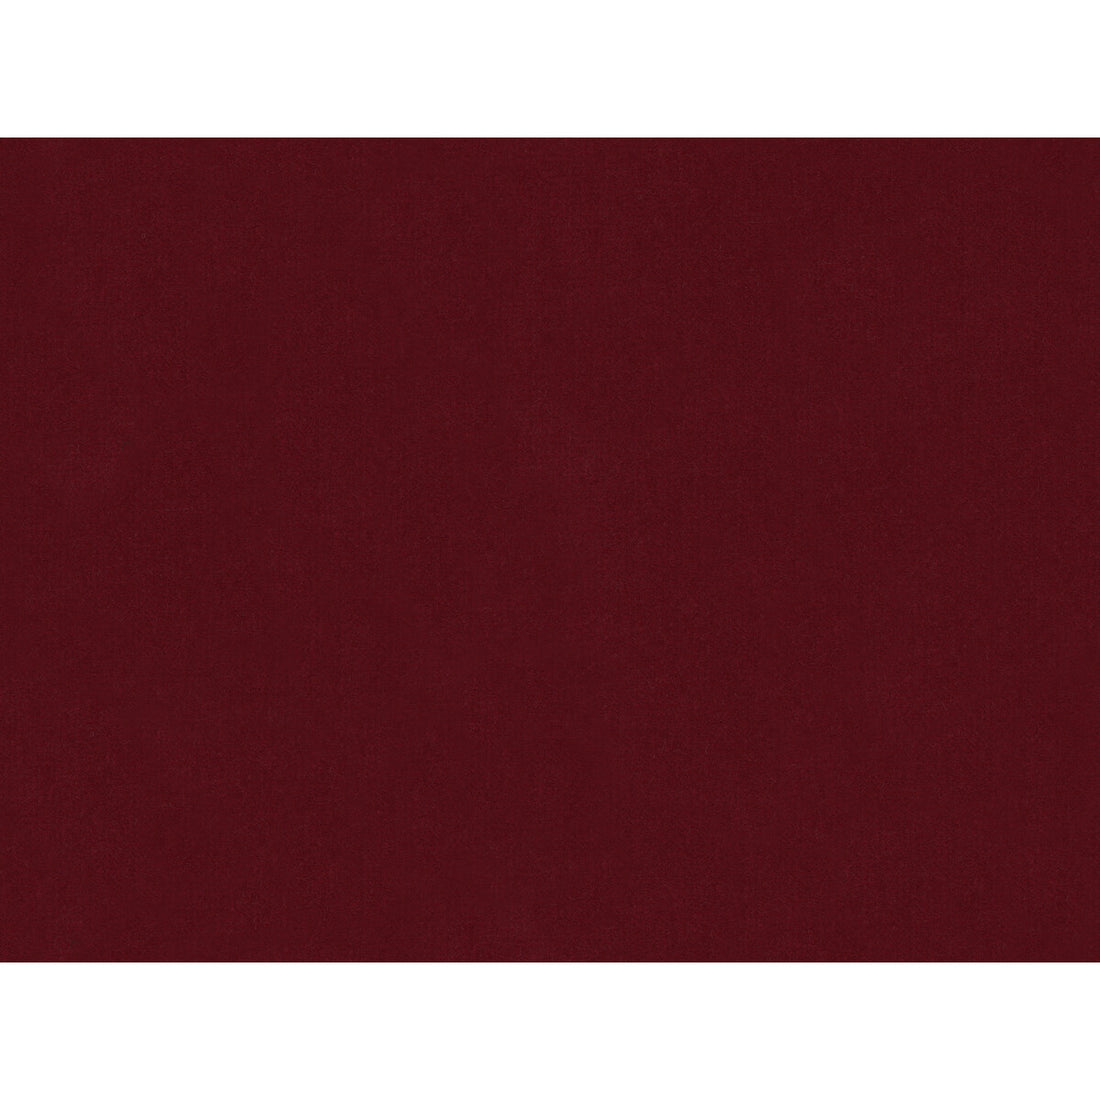 Oxford Velvet fabric in cherry color - pattern 2016122.19.0 - by Lee Jofa